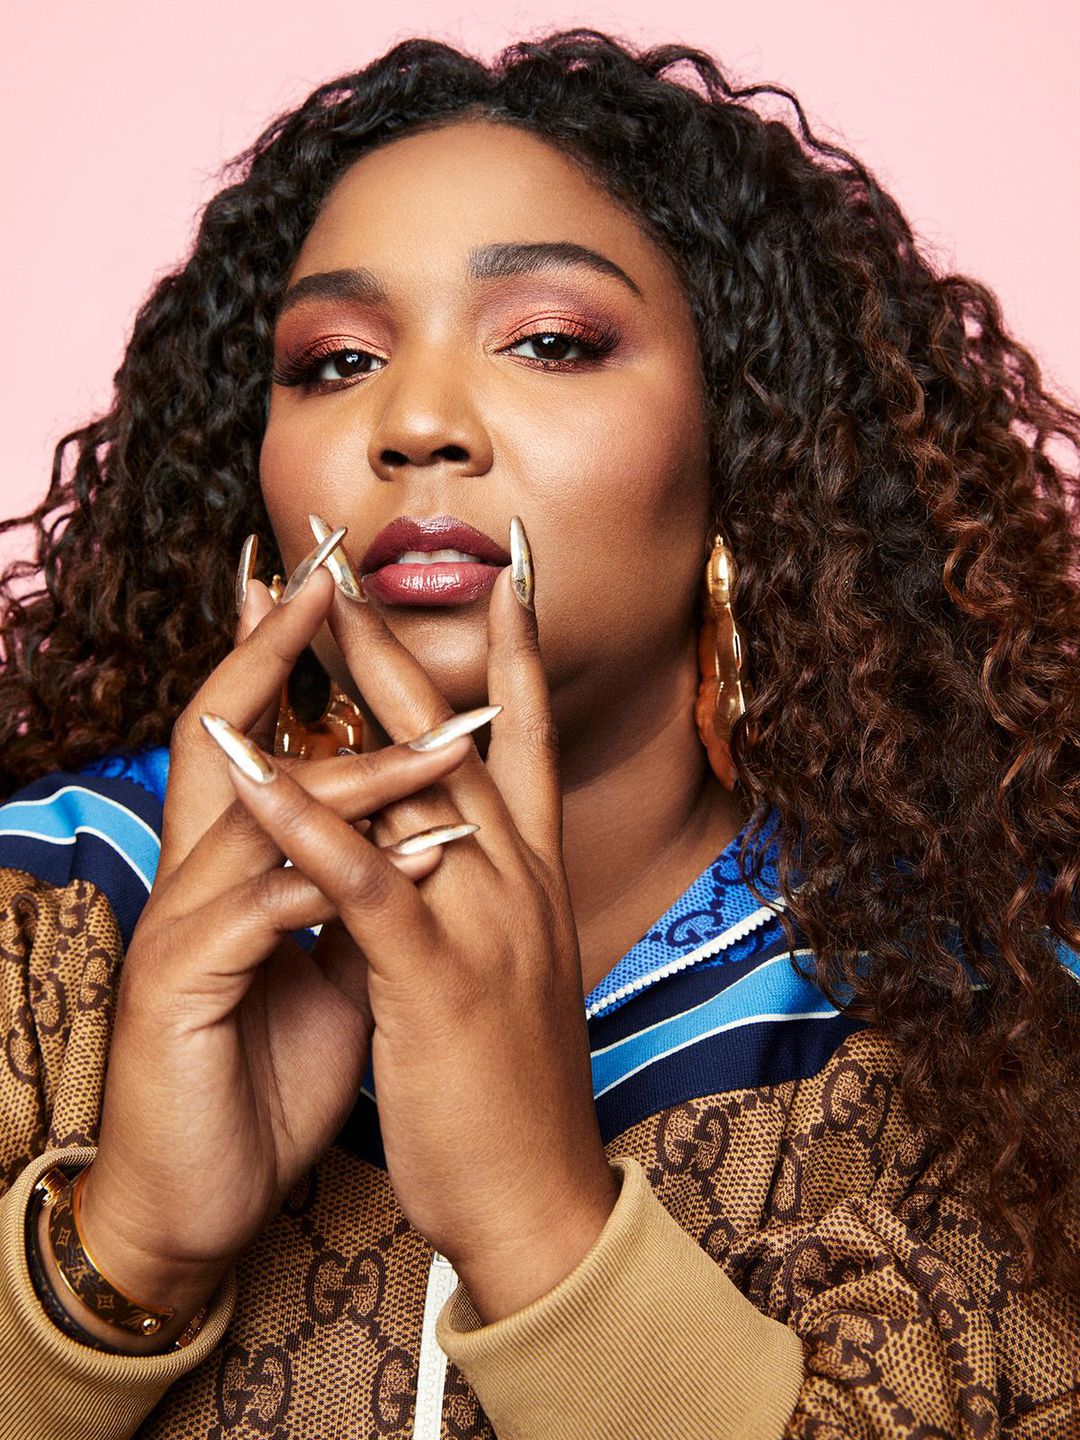 Lizzo in her youth